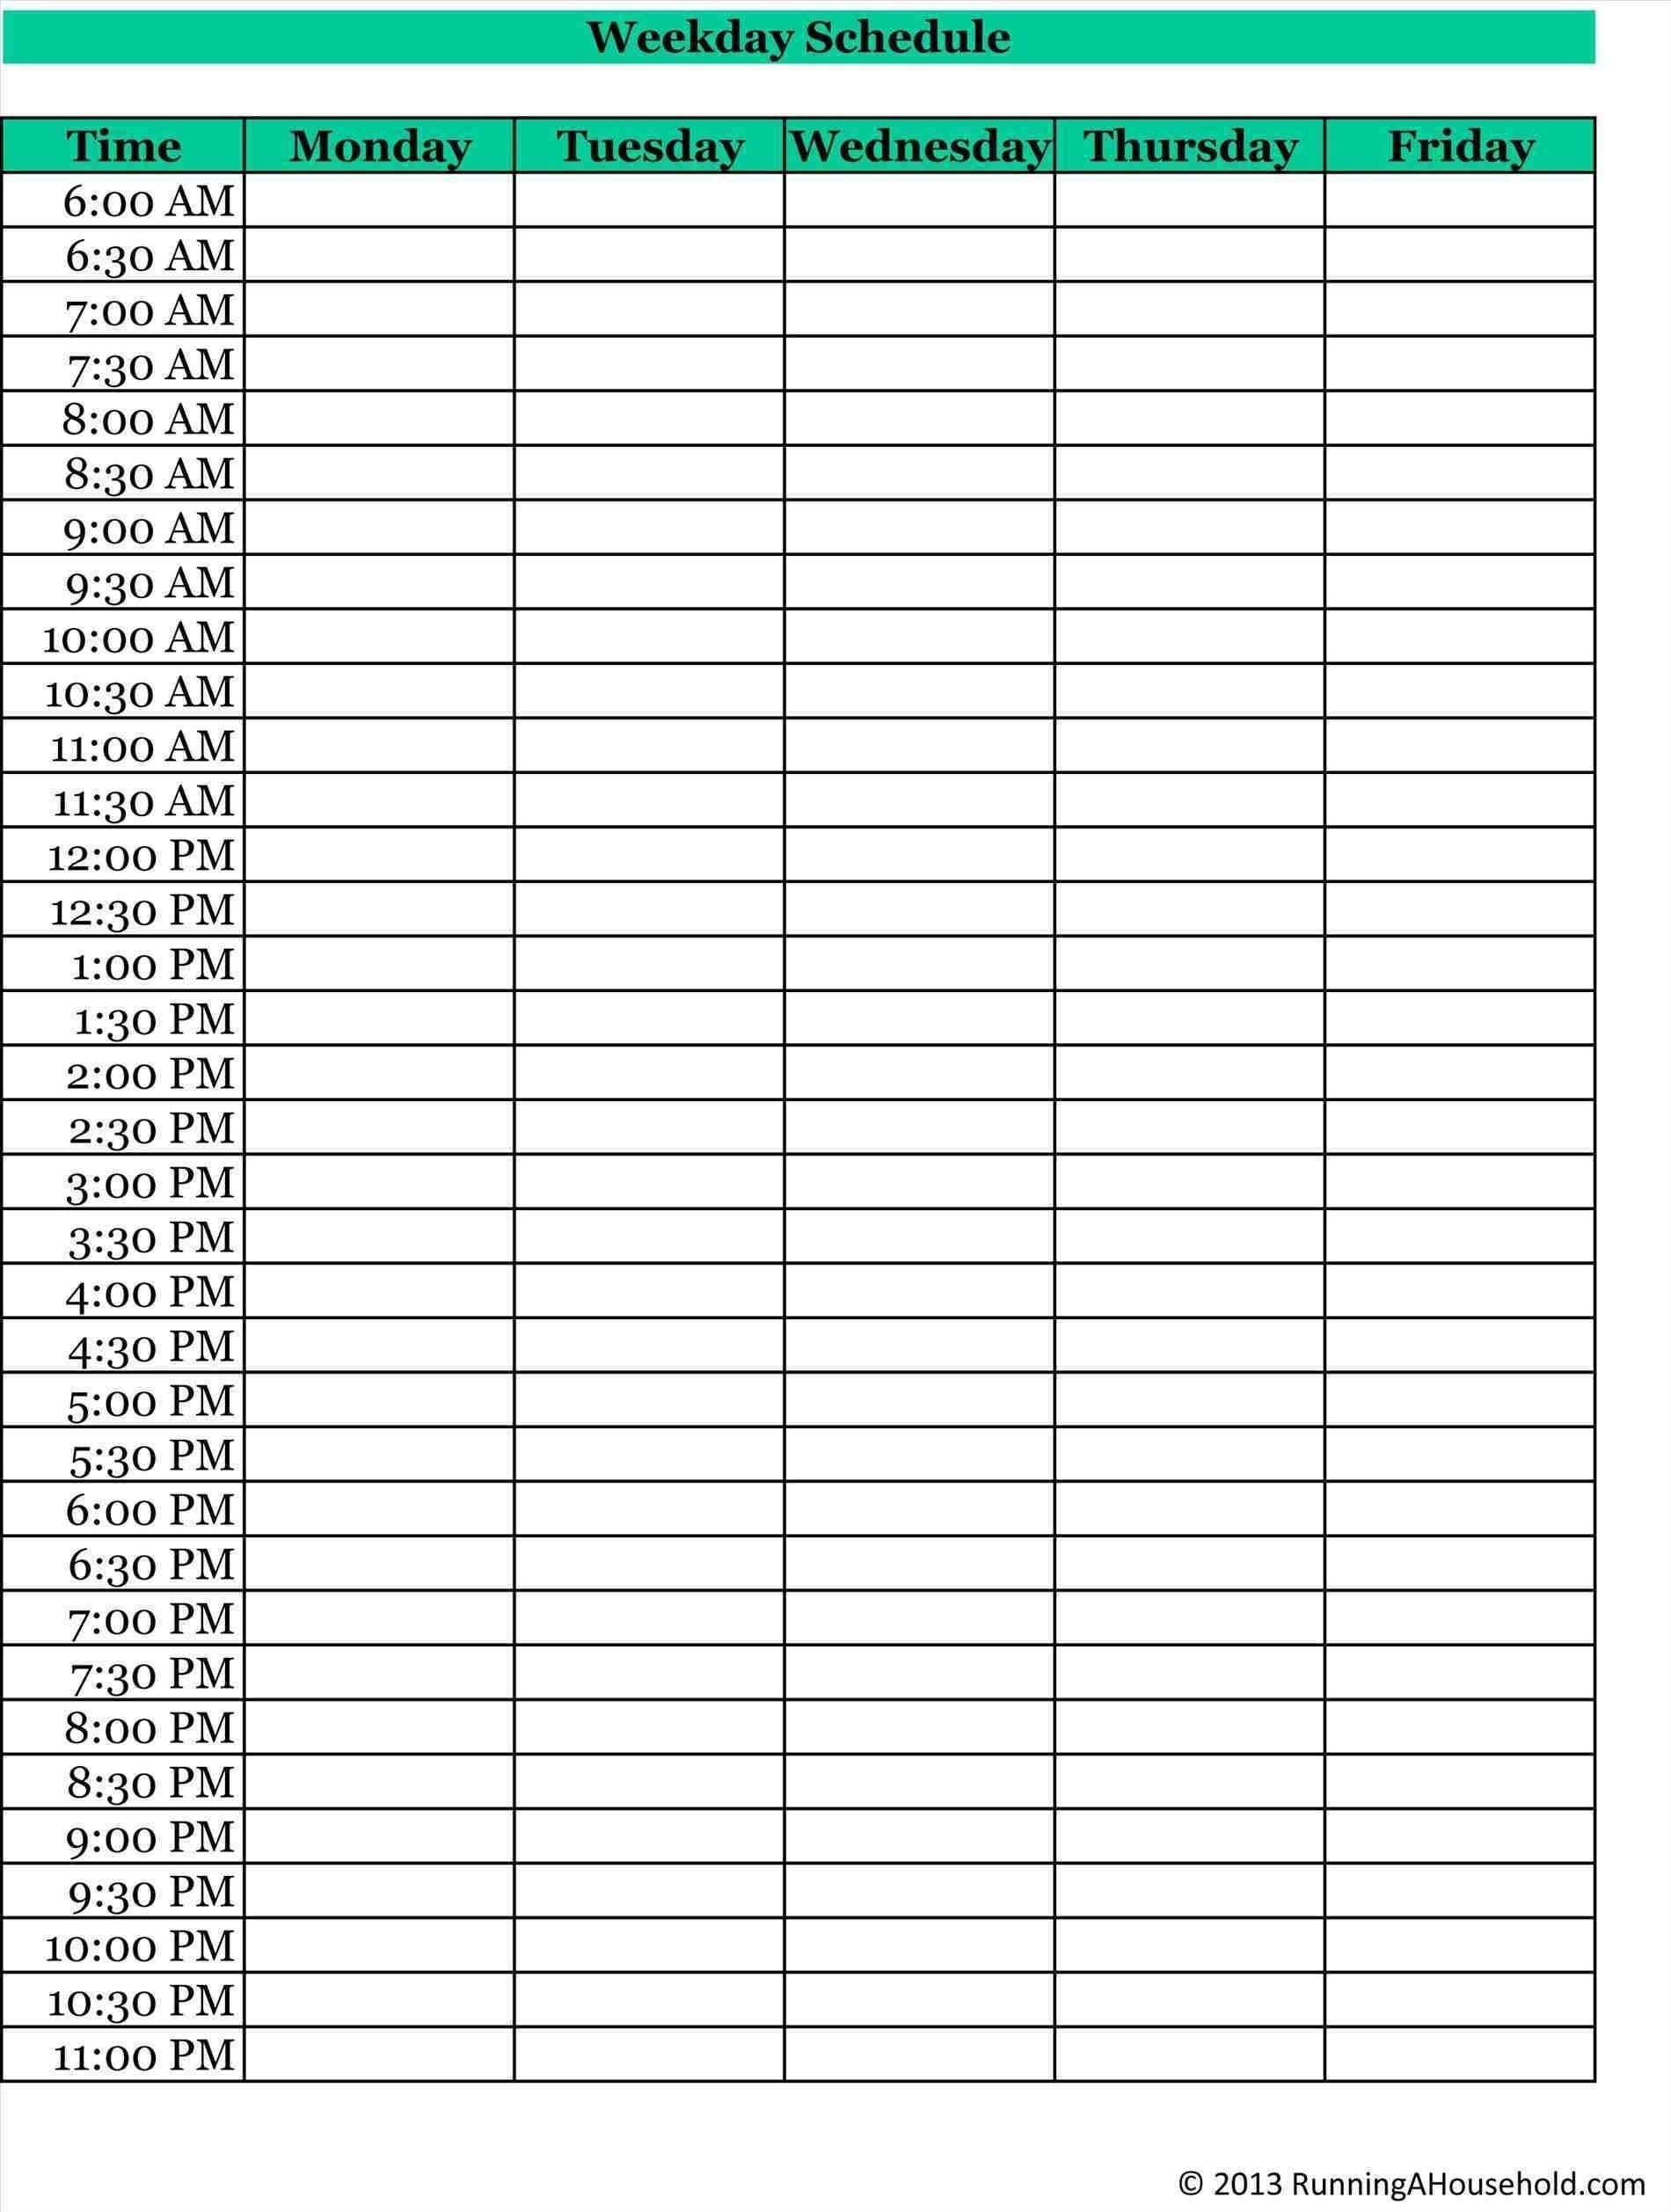 15 Minute Schedule Printable Template  Template Calendar pertaining to Free 30 Minute Appointment Schedule Template